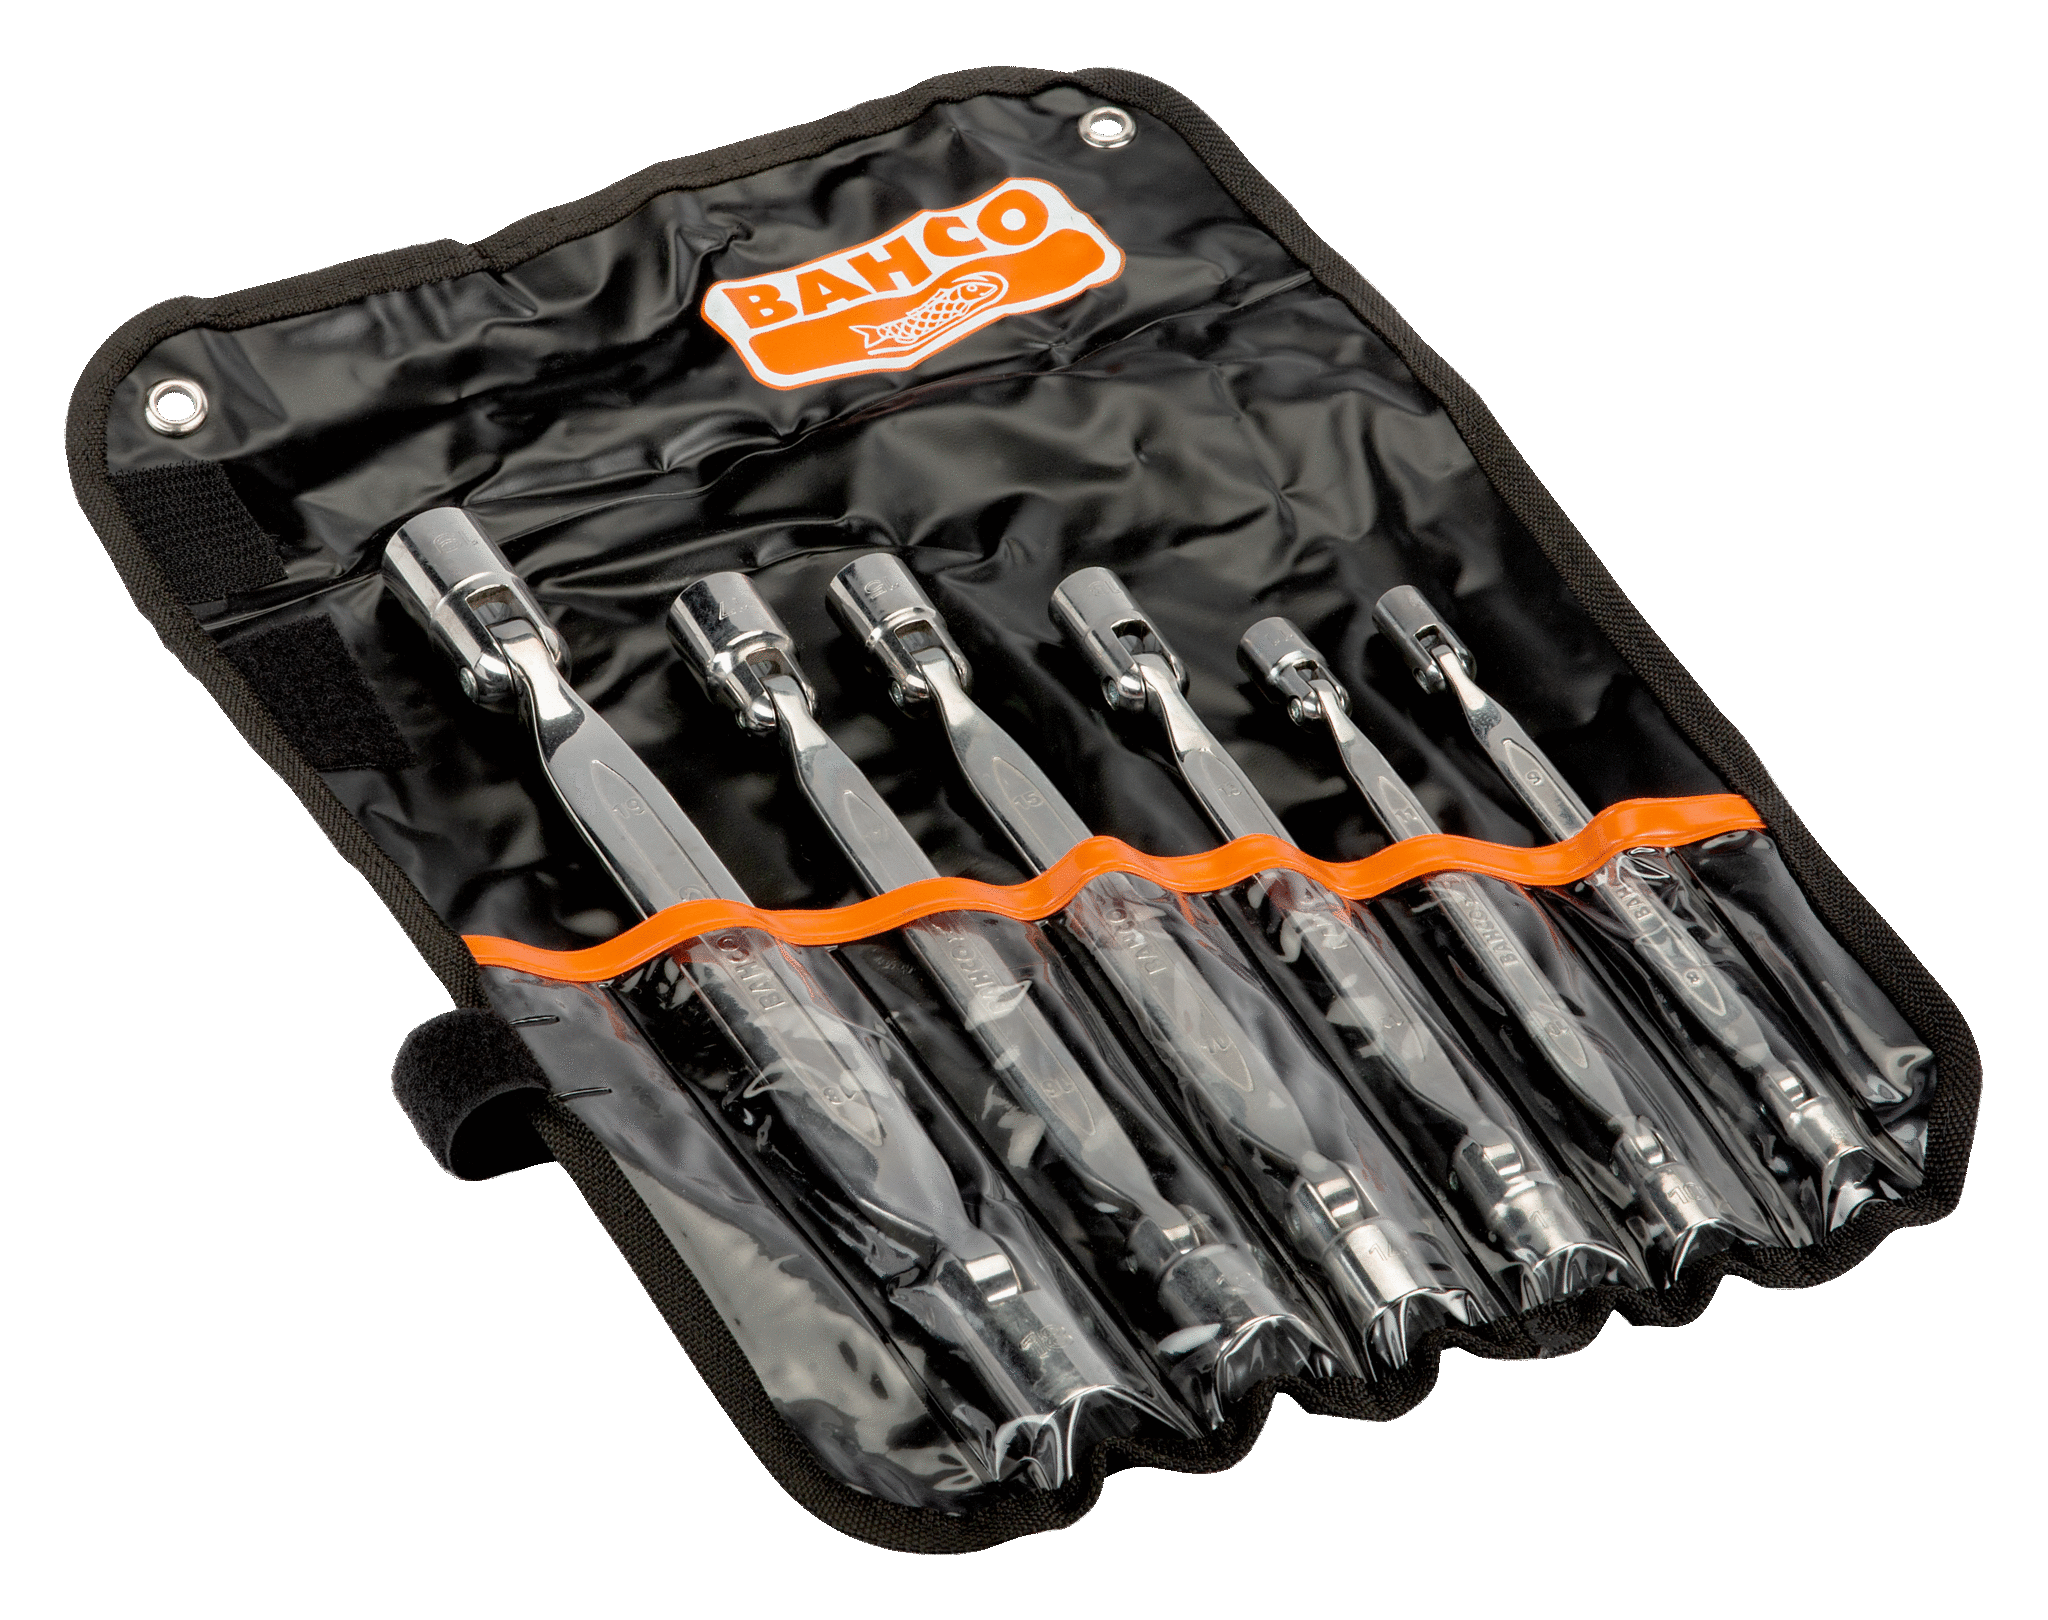 BAHCO 4040M/6T Metric Double Ended Swivel Head Socket Wrench Set - Premium Socket Wrench Set from BAHCO - Shop now at Yew Aik.